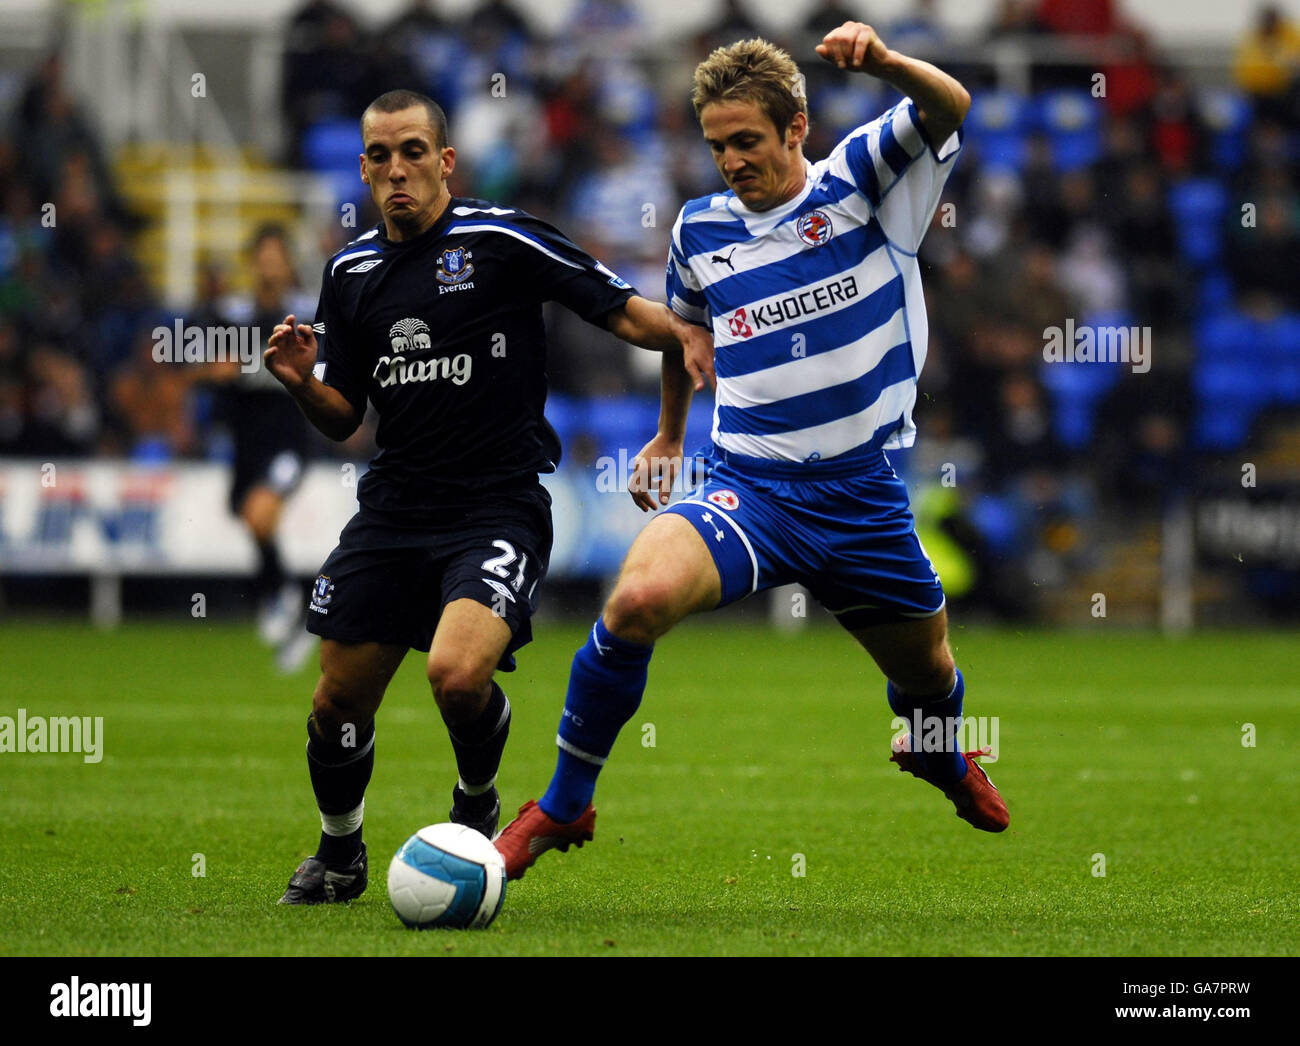 Soccer - Barclays Premier League - Reading v Everton - Madejski Stadium. Everton's Leon Osman (left) and Reading's Kevin Doyle in action during the Barclays Premier League match at the Madejski Stadium, Reading. Stock Photo